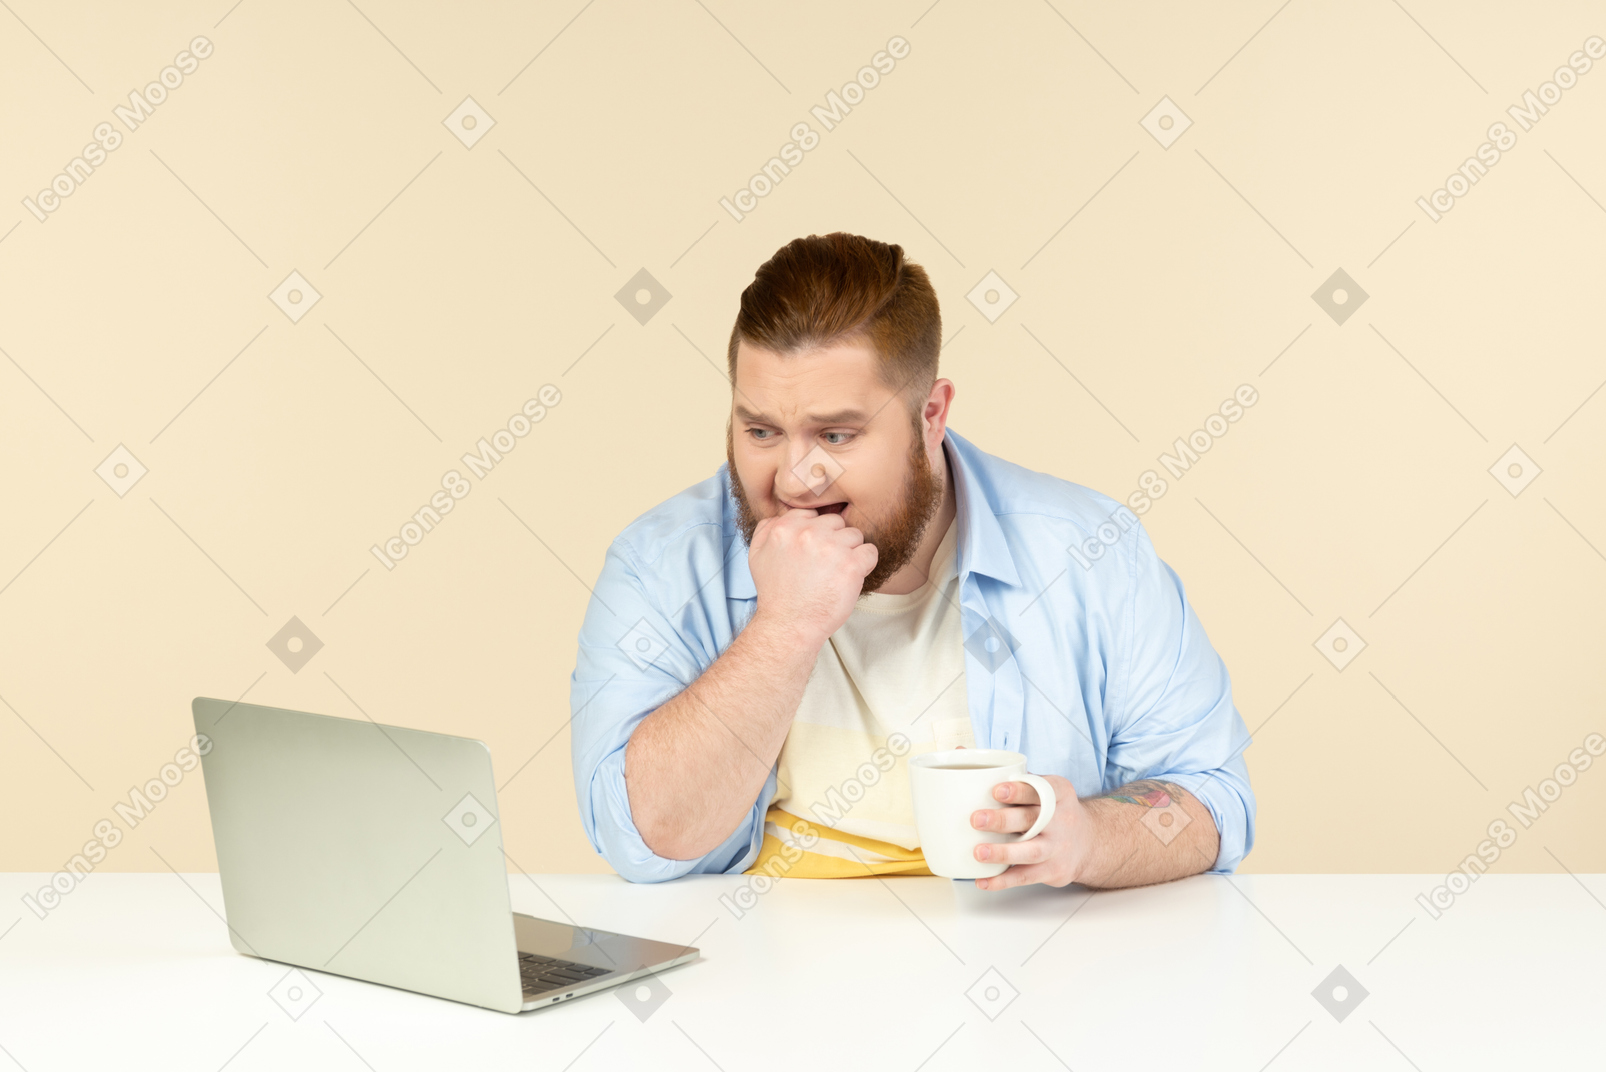 Angry looking young overweight man sitting in front of laptop and having tea